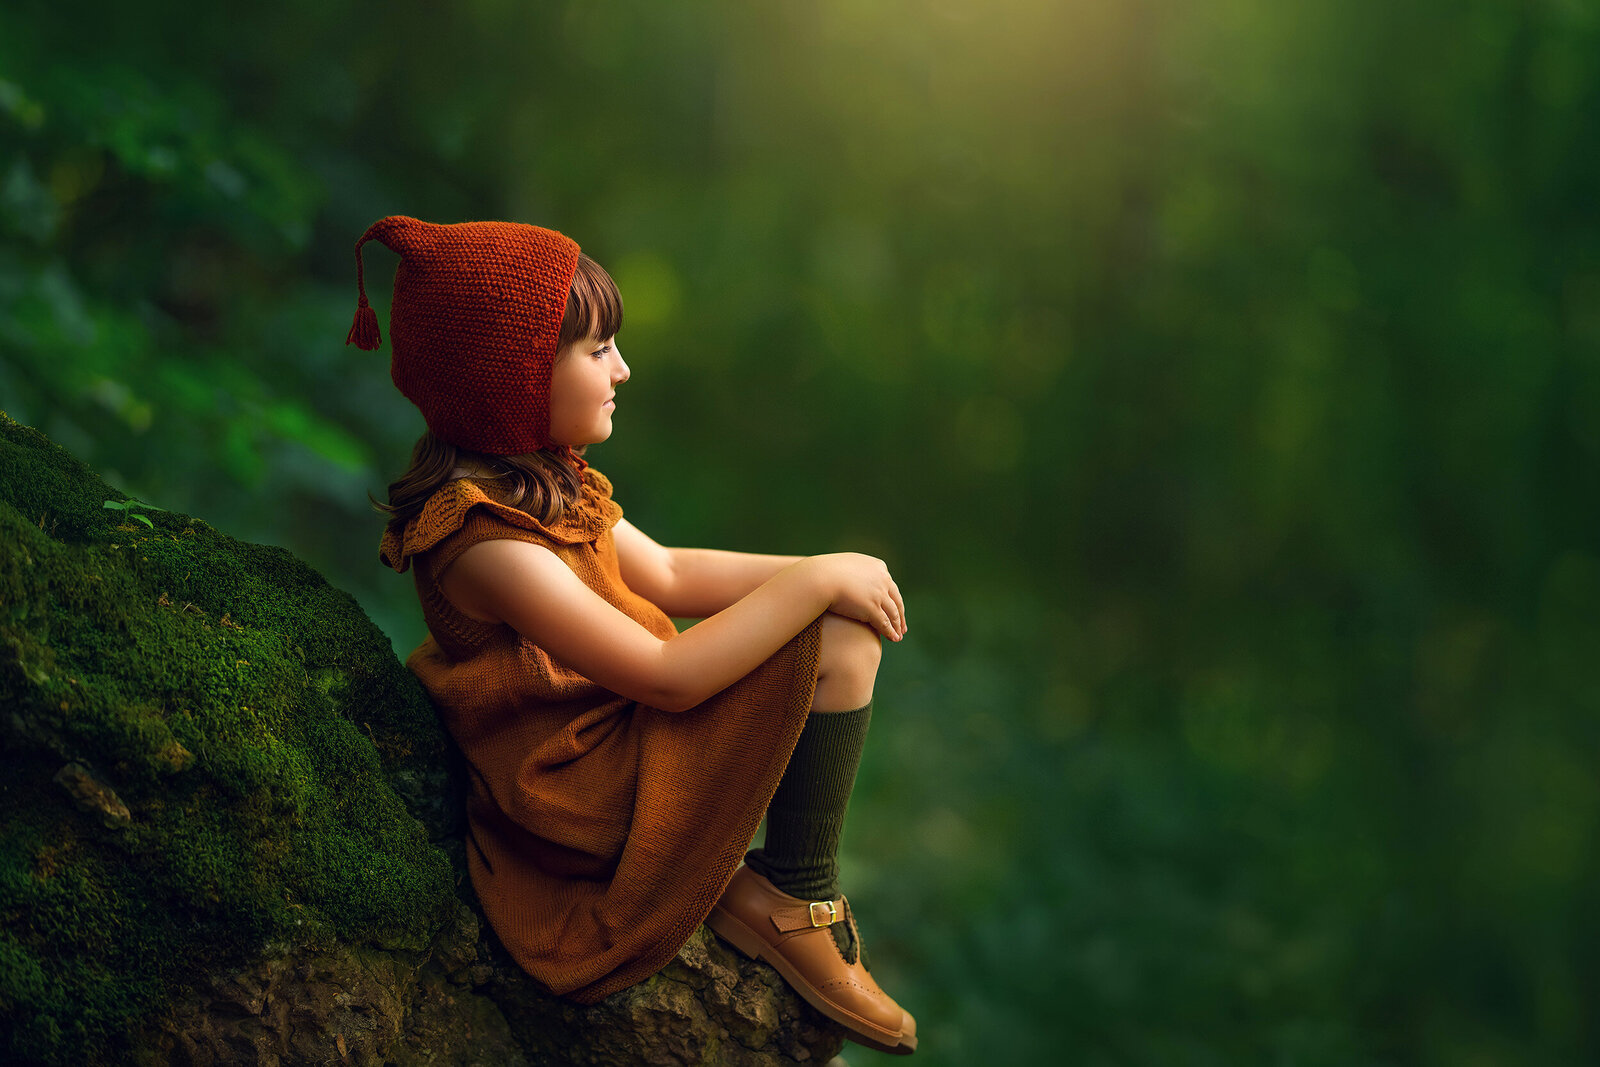 Ethereal portrait of a 6-year-old girl dressed in bespoke knit garments from children clothing company Miou. She is seated on a rock at Ledge Park in Horicon, Wisconsin.